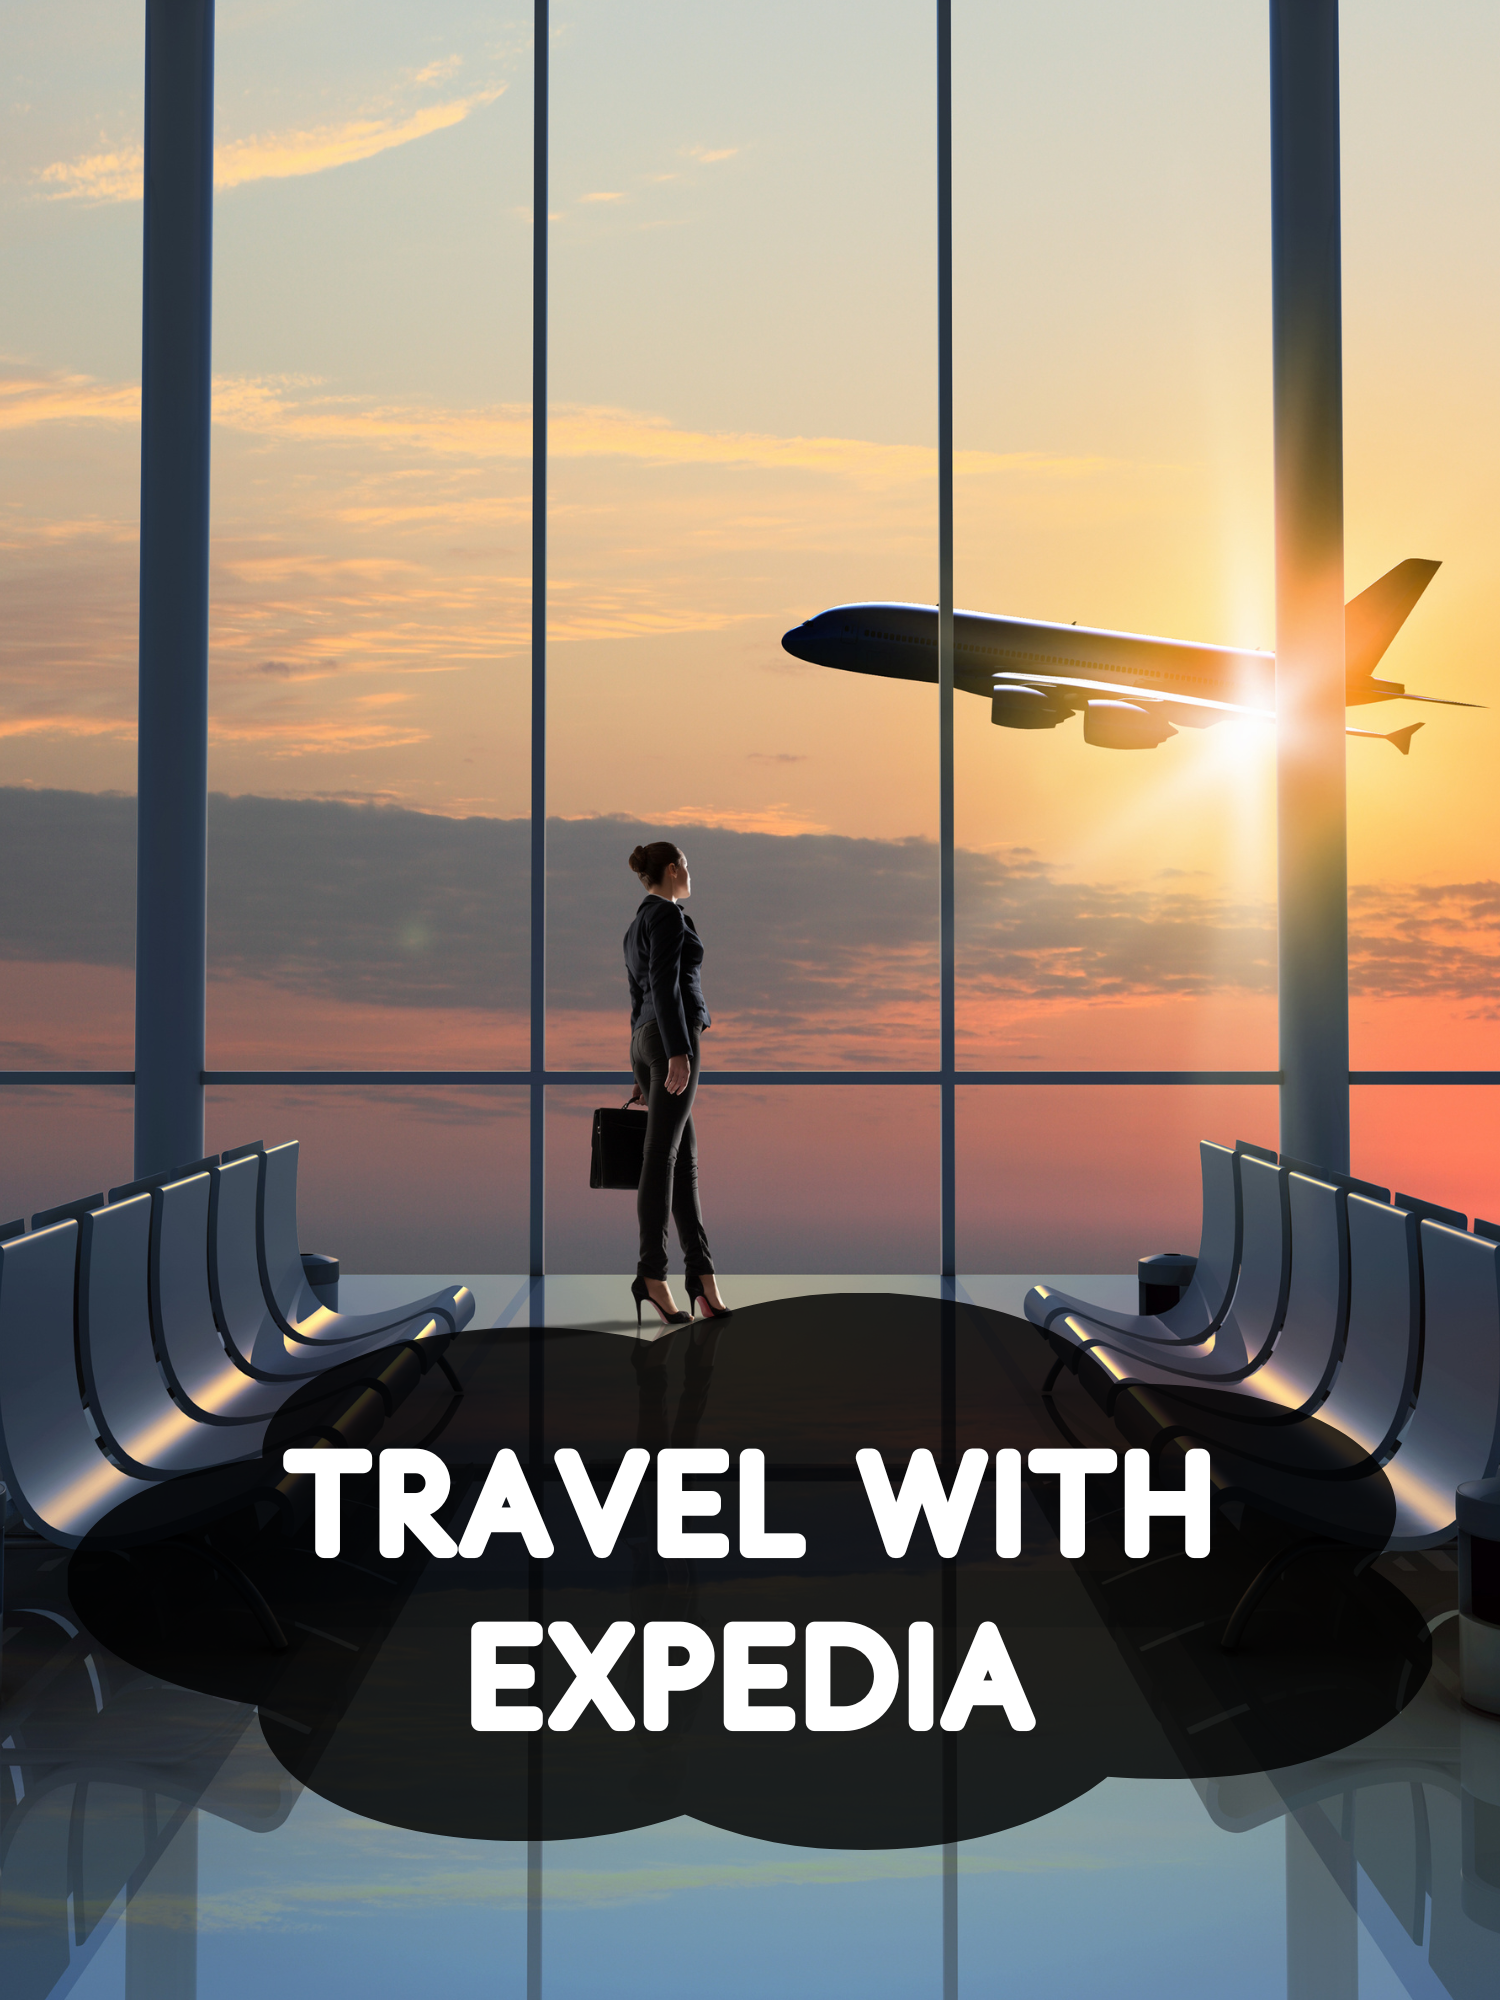 Travel with Expedia